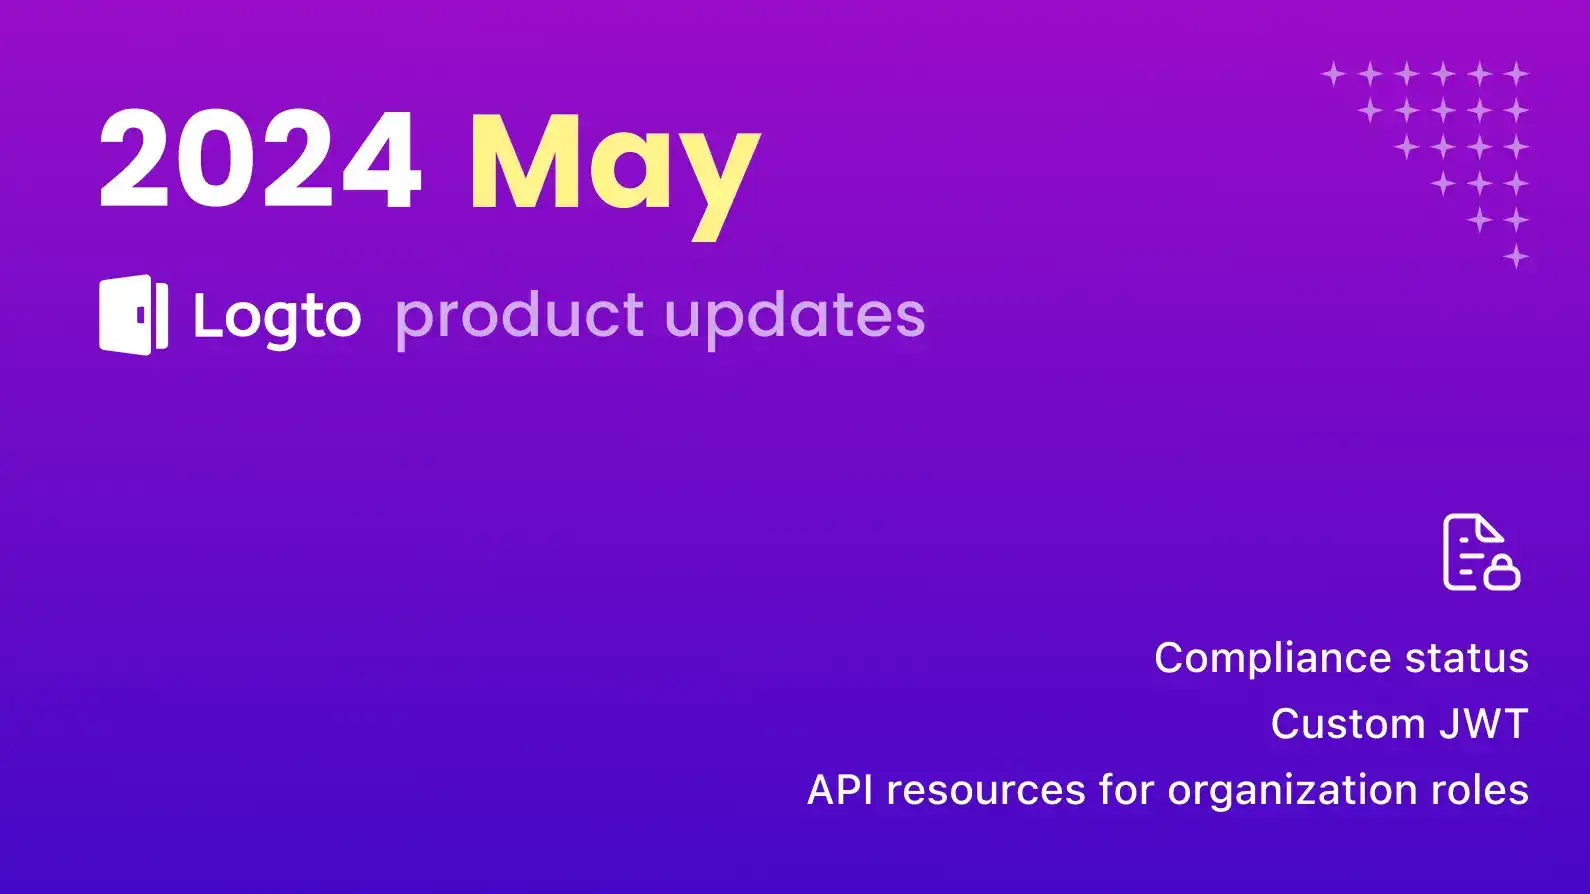 Logto product update: Compliance status, custom JWT, API resources for organization roles, and more